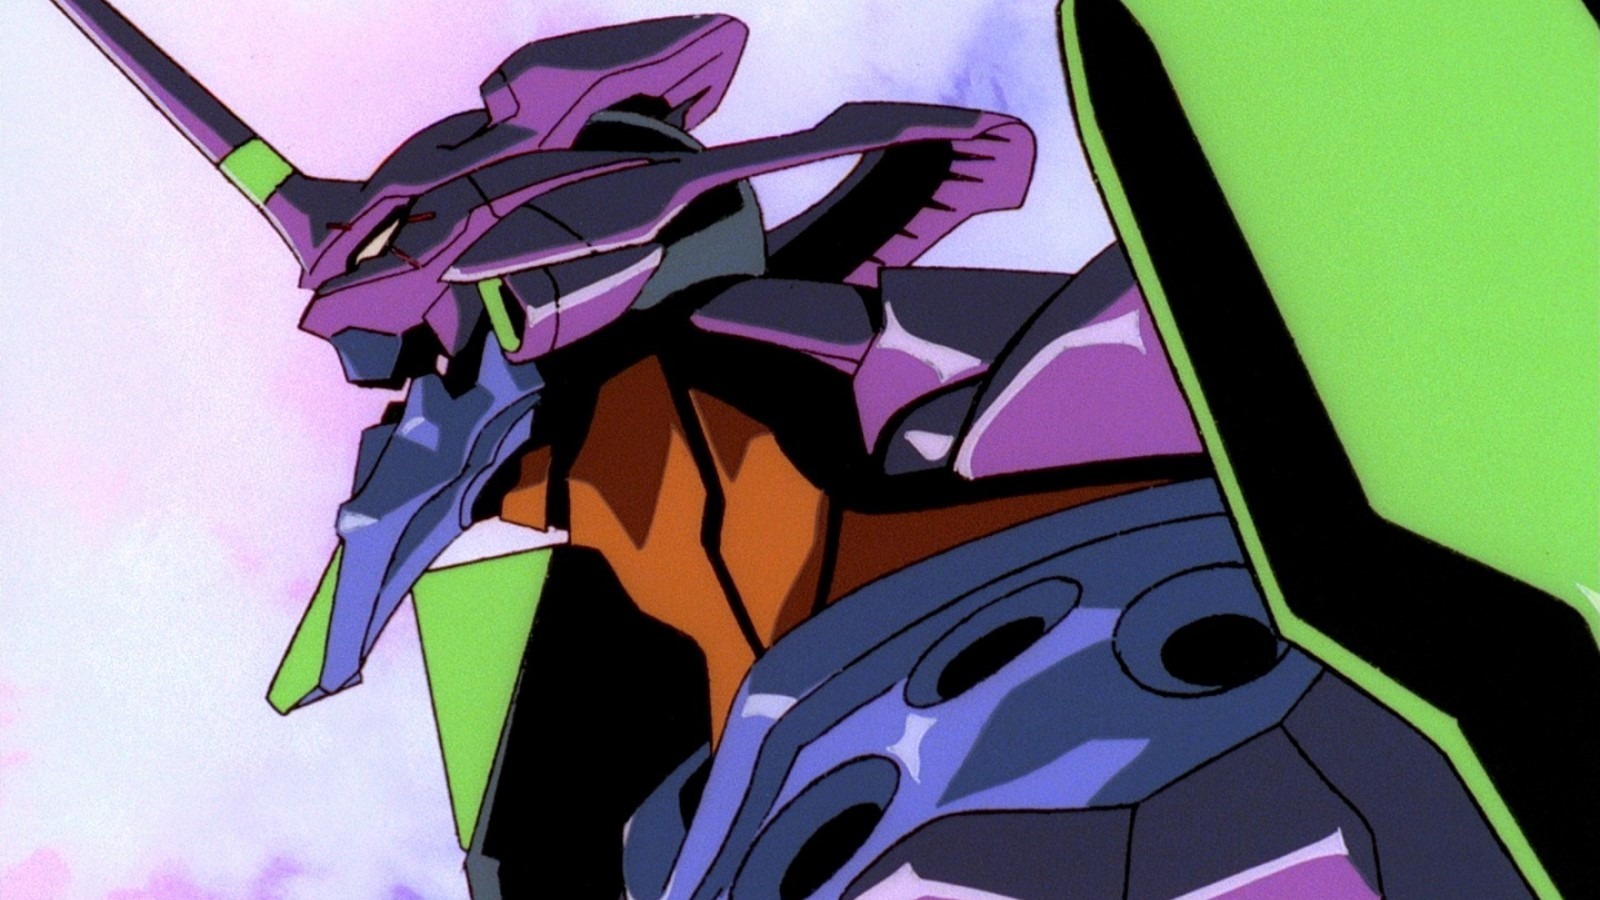 Hideaki Anno Only Had One Goal For Neon Evangelion